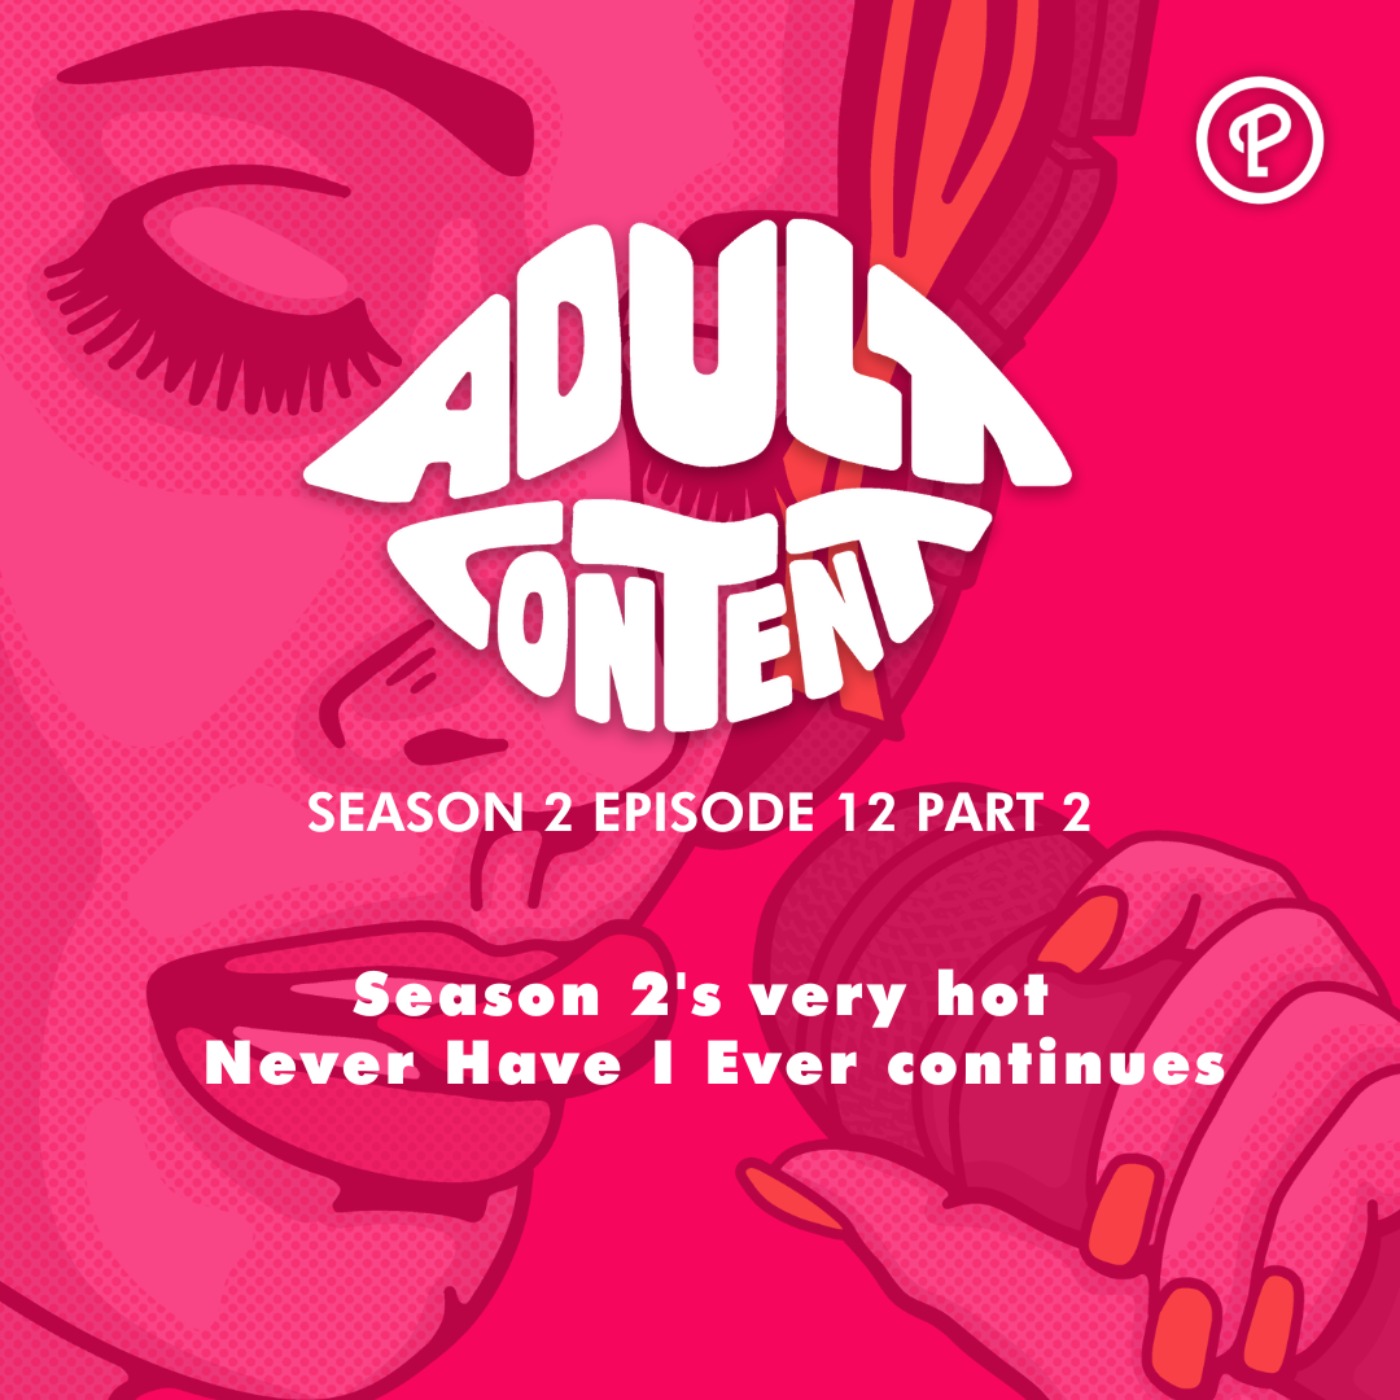 S2E12 Pt. 2: Season 2's very hot Never Have I Ever continues